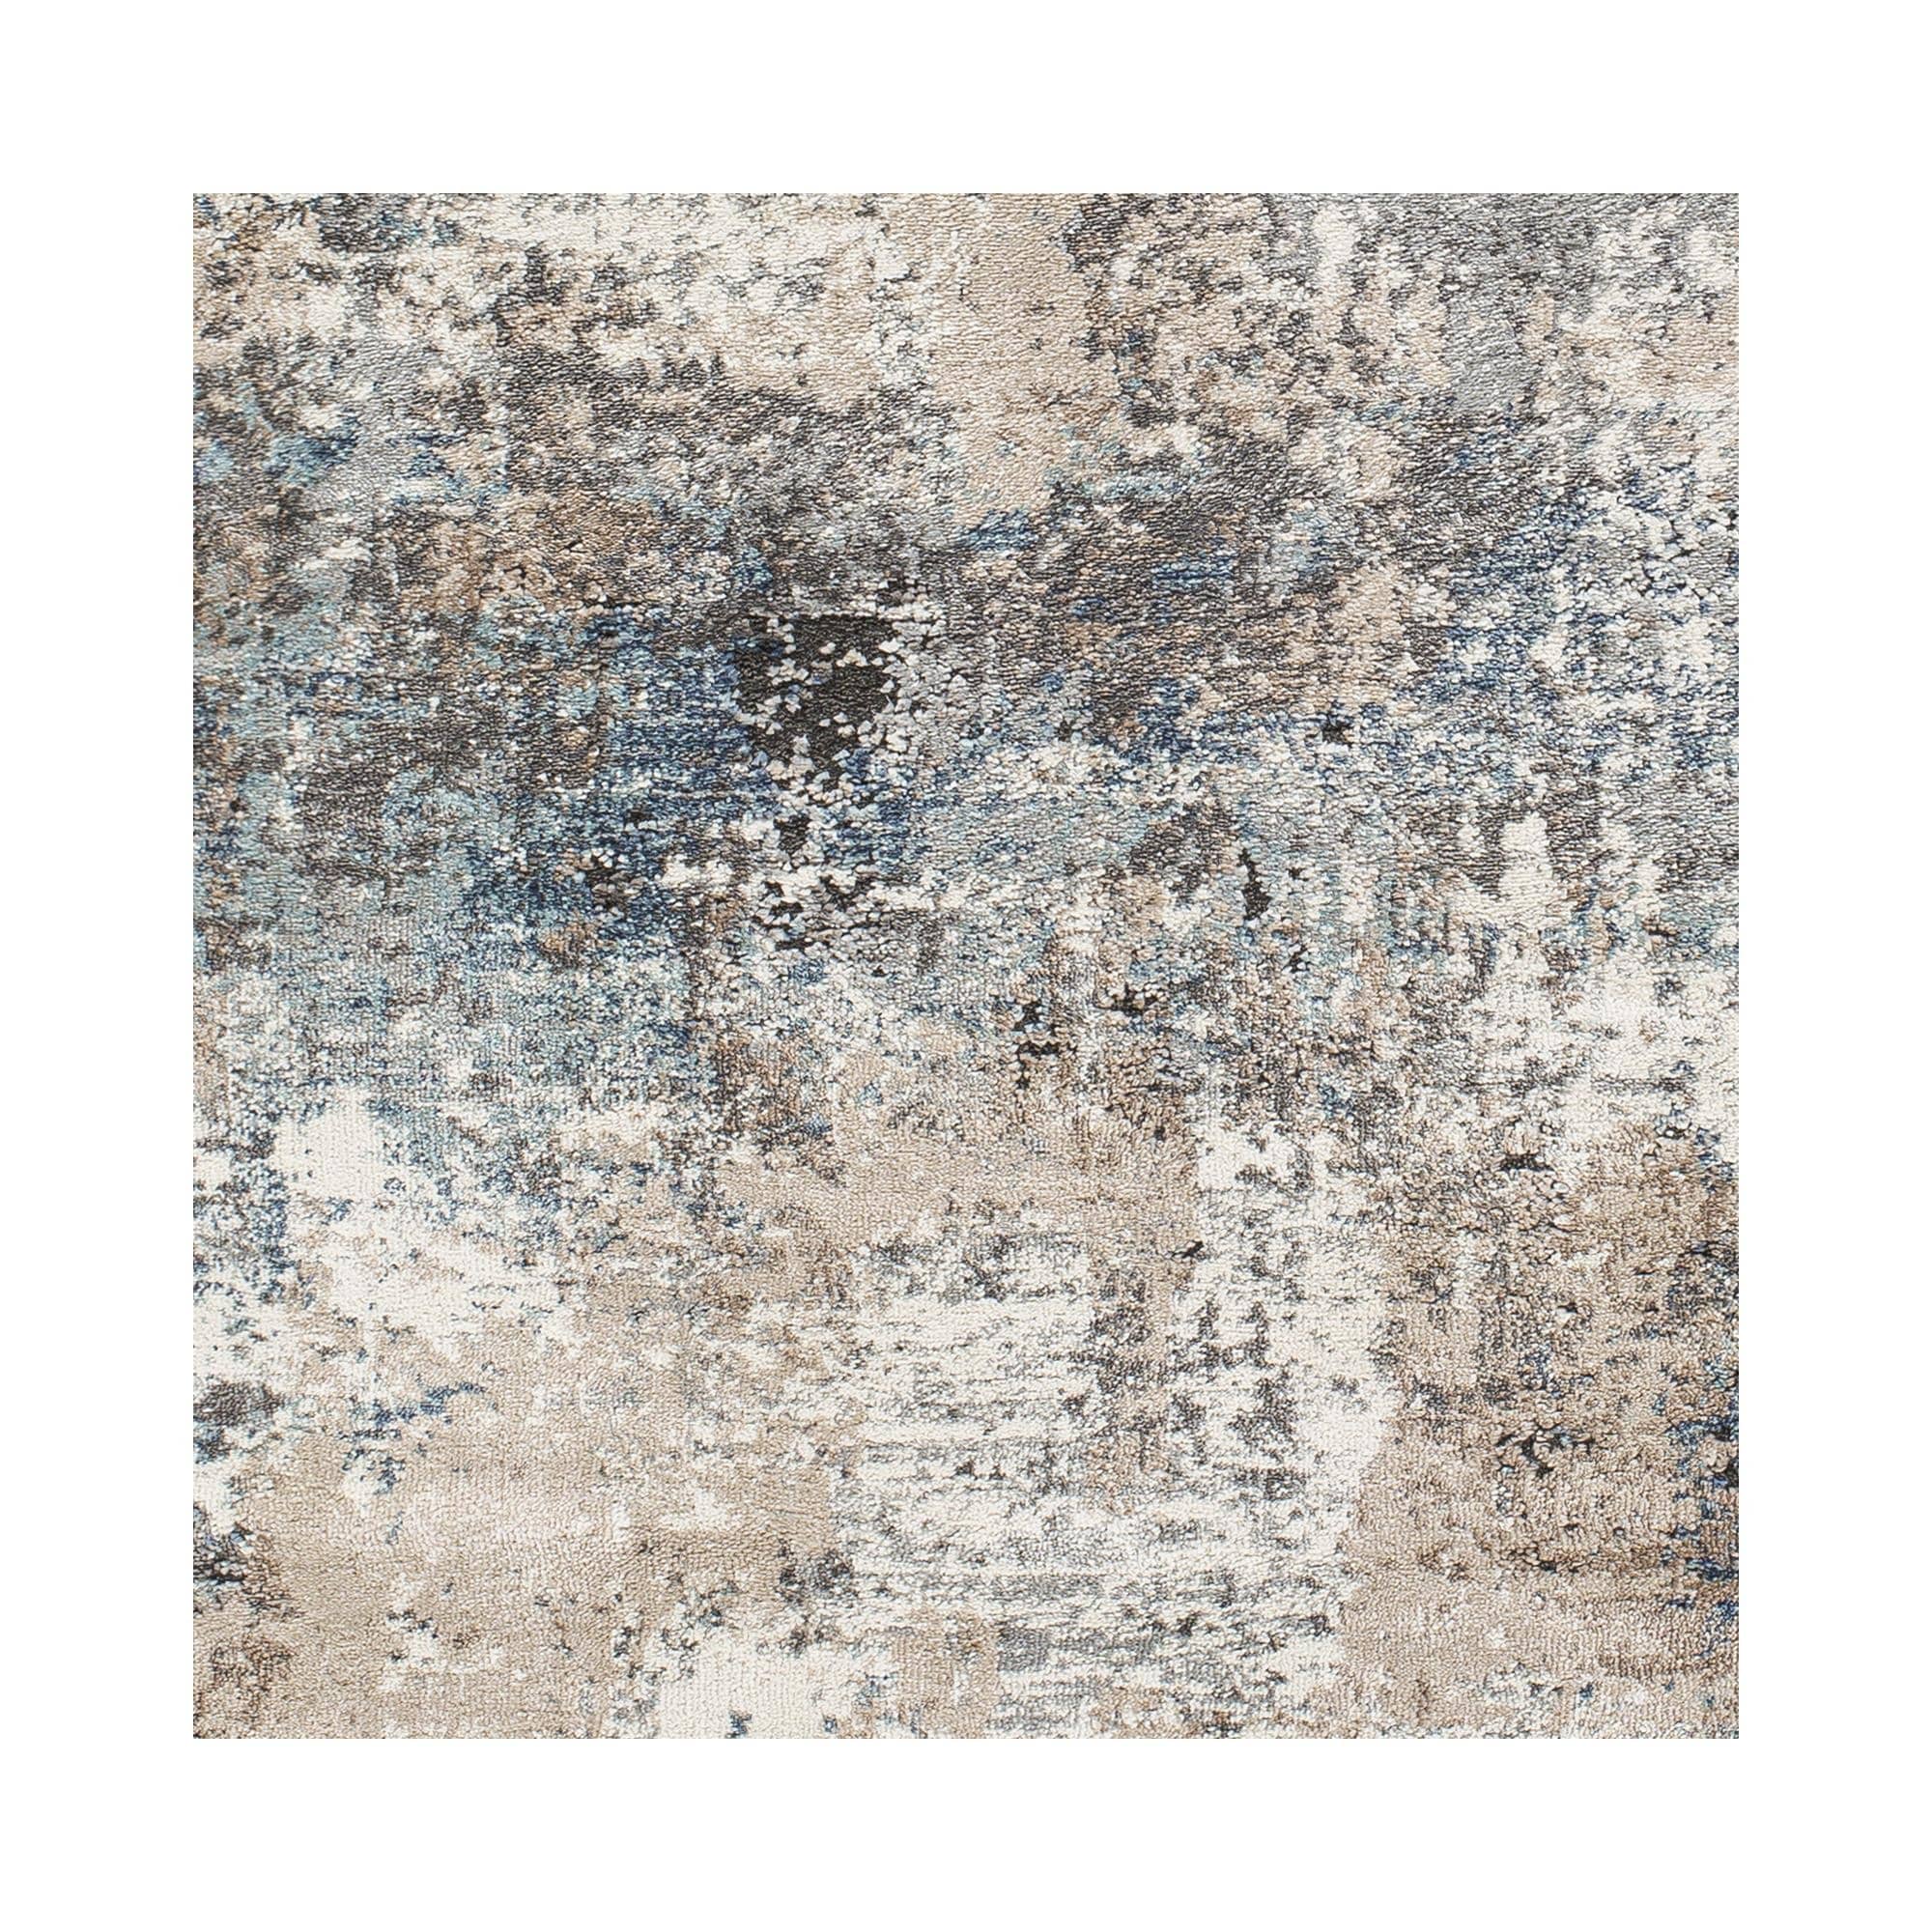 https://ak1.ostkcdn.com/images/products/is/images/direct/6b5fddaa5f28e38776a391592352e1d7e9a7adf0/Artistic-Weavers-Cansu-Rustic-Abstract-Area-Rug.jpg